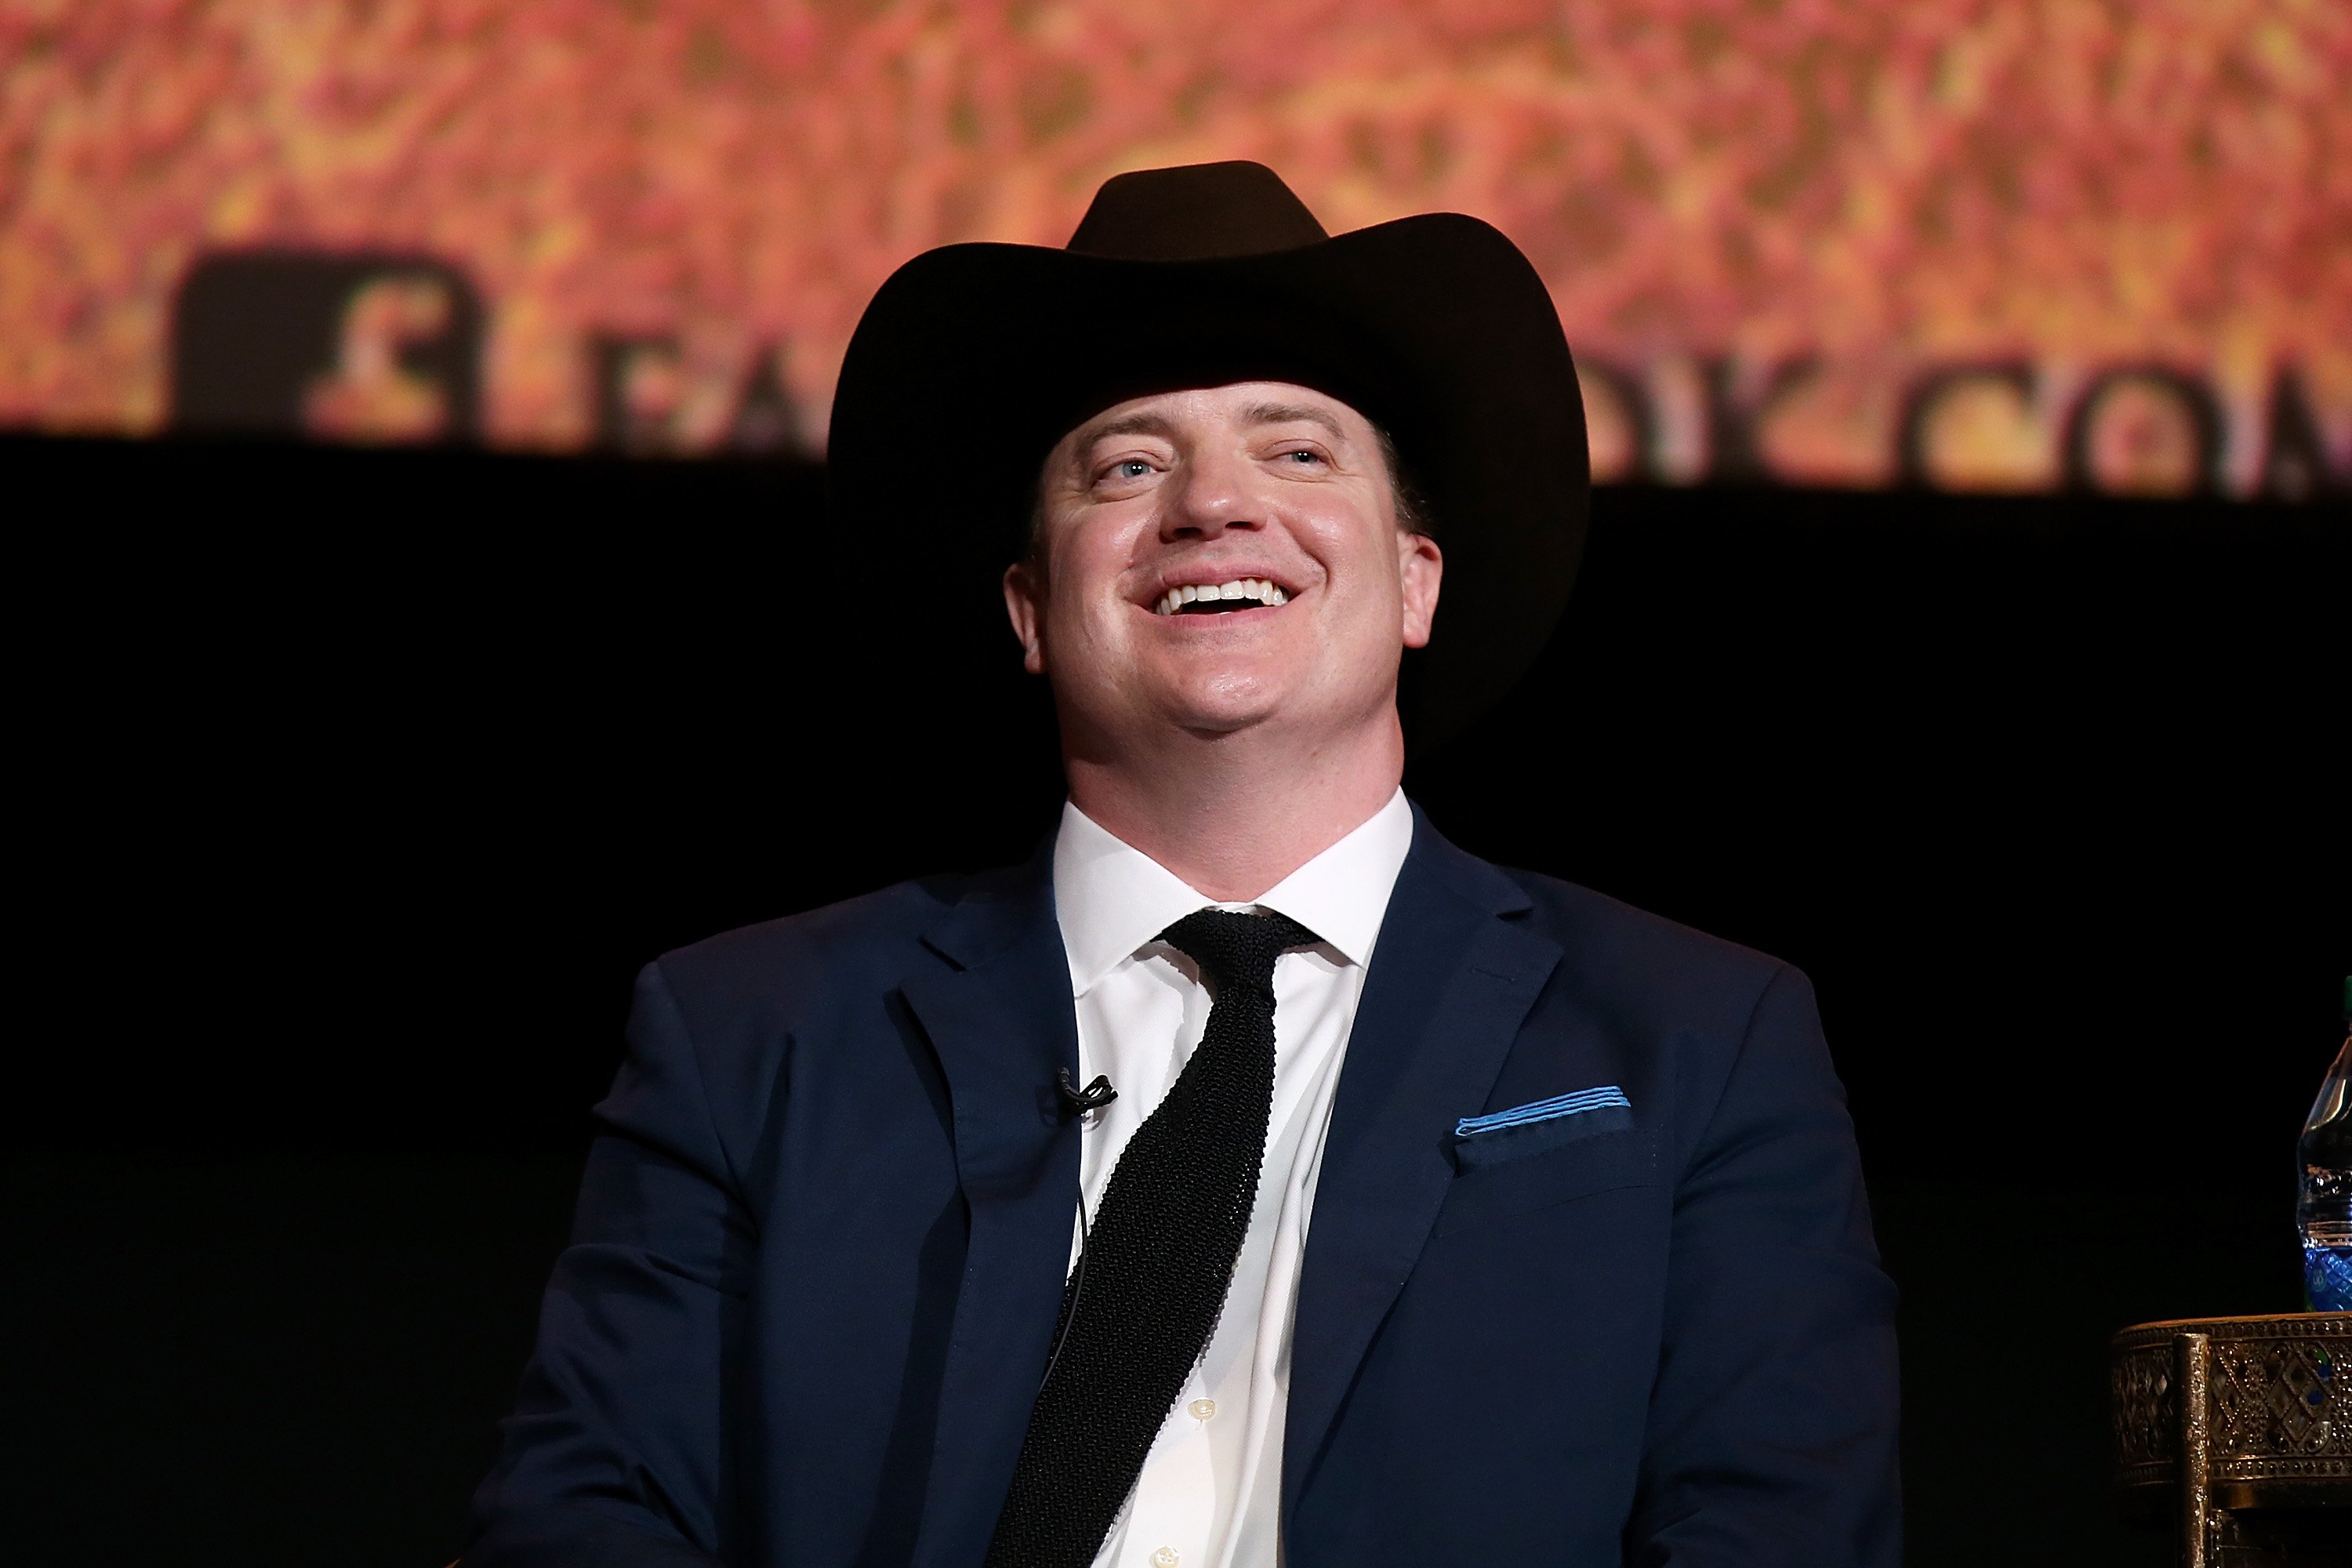 Brendan Fraser speaks onstage during the For Your Consideration Event for FX's "Trust" at Saban Media Center on May 11, 2018 | Photo: Getty Images